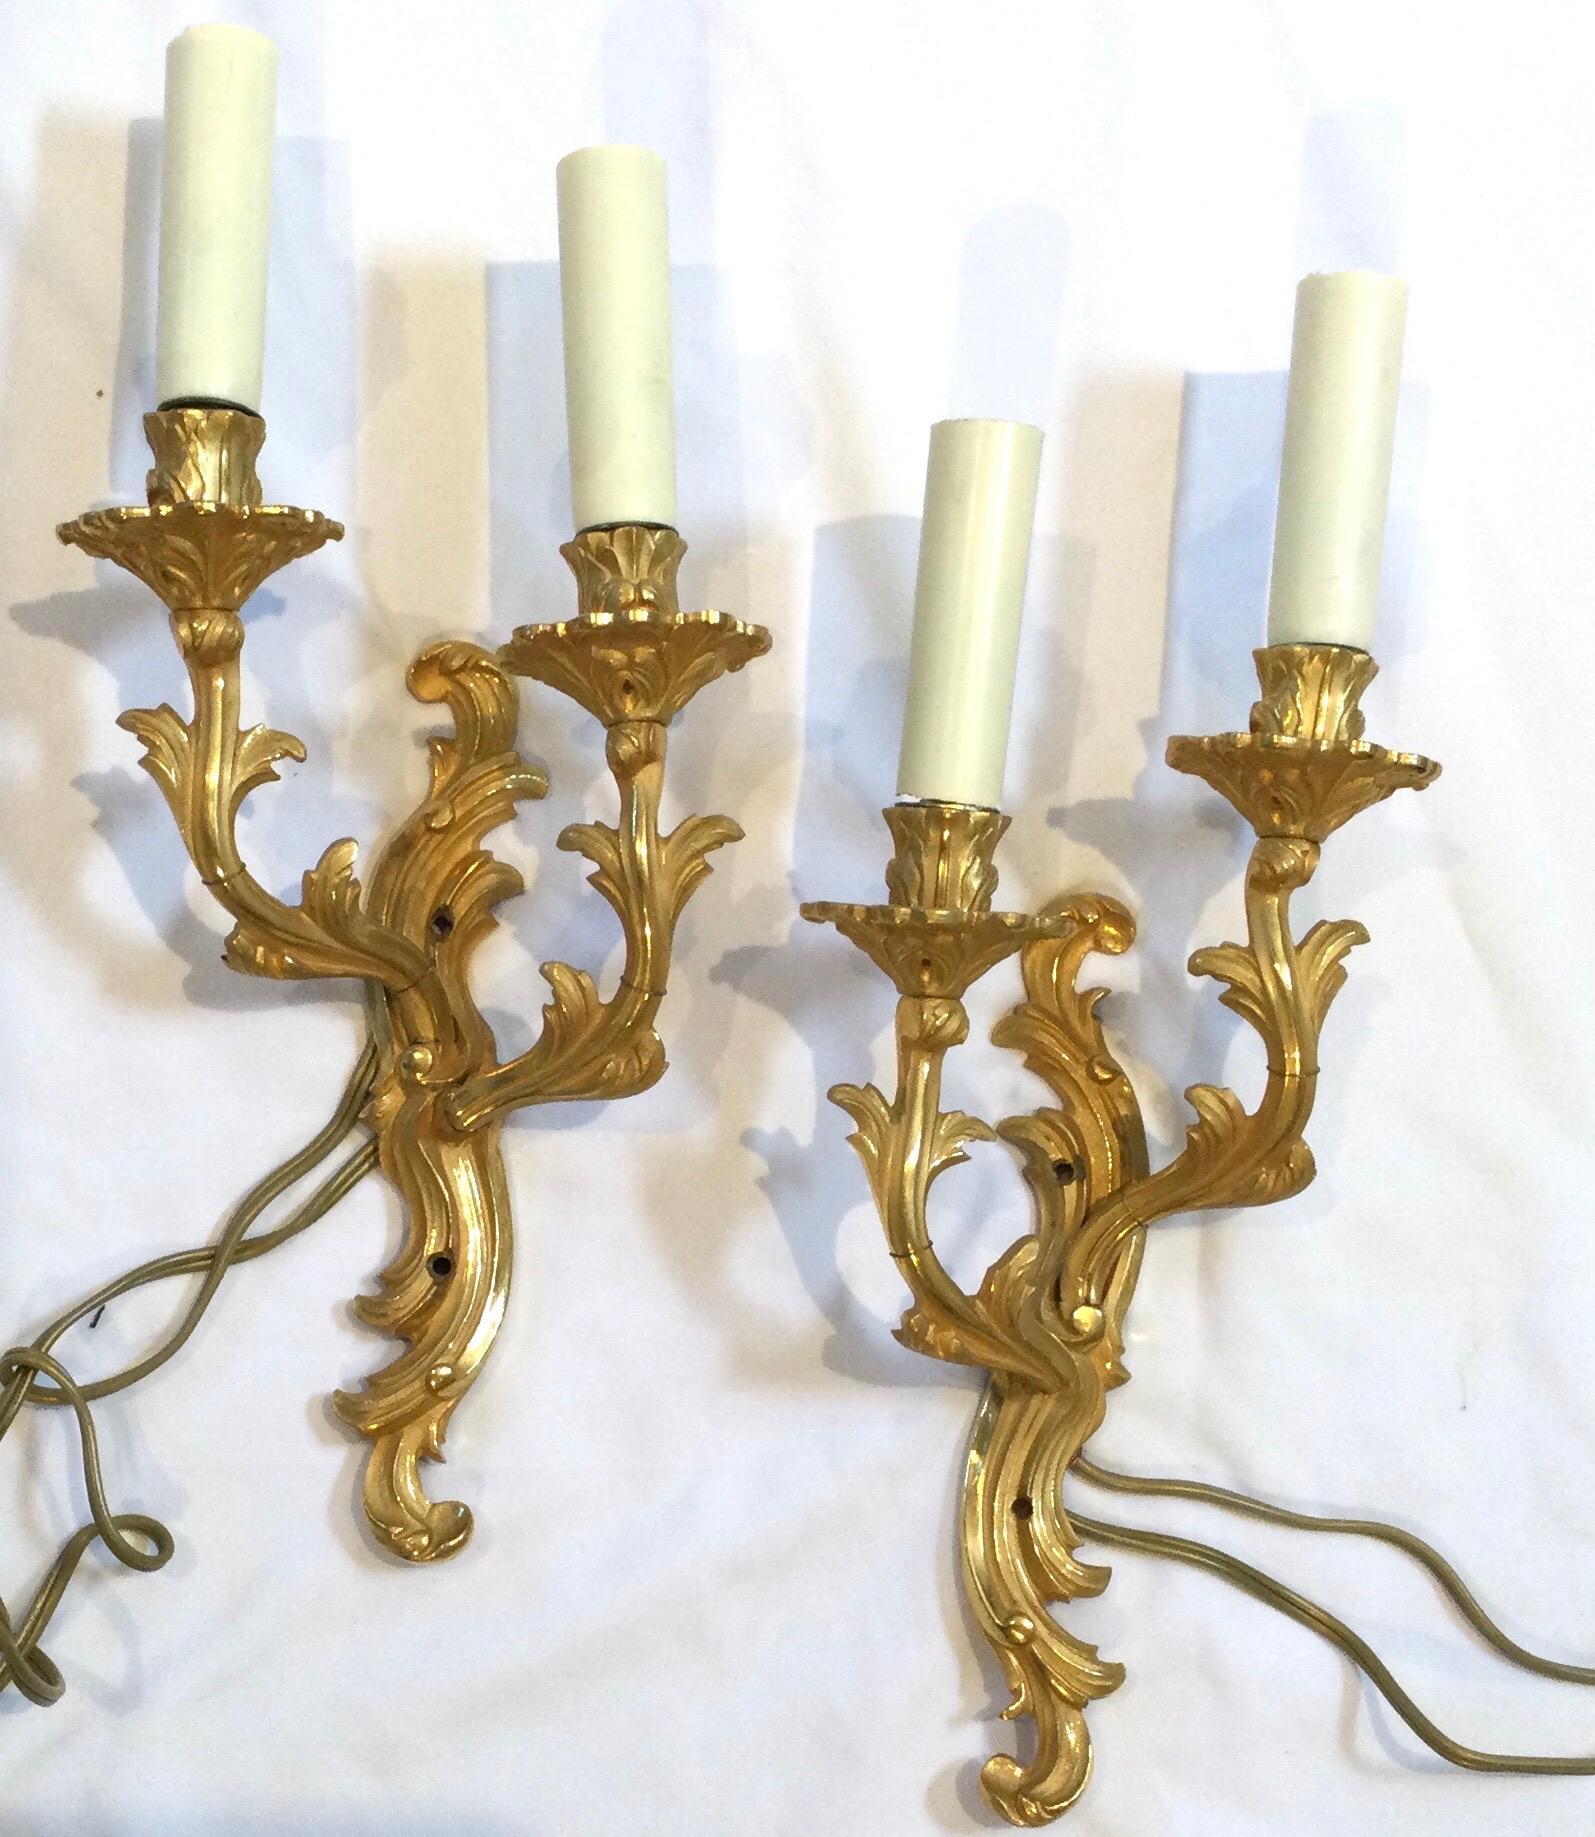 Pair of bronze French style two-light wall sconces, very good condition. Smaller size which is great for a powder room, or smaller hallway.
Dimensions: 14